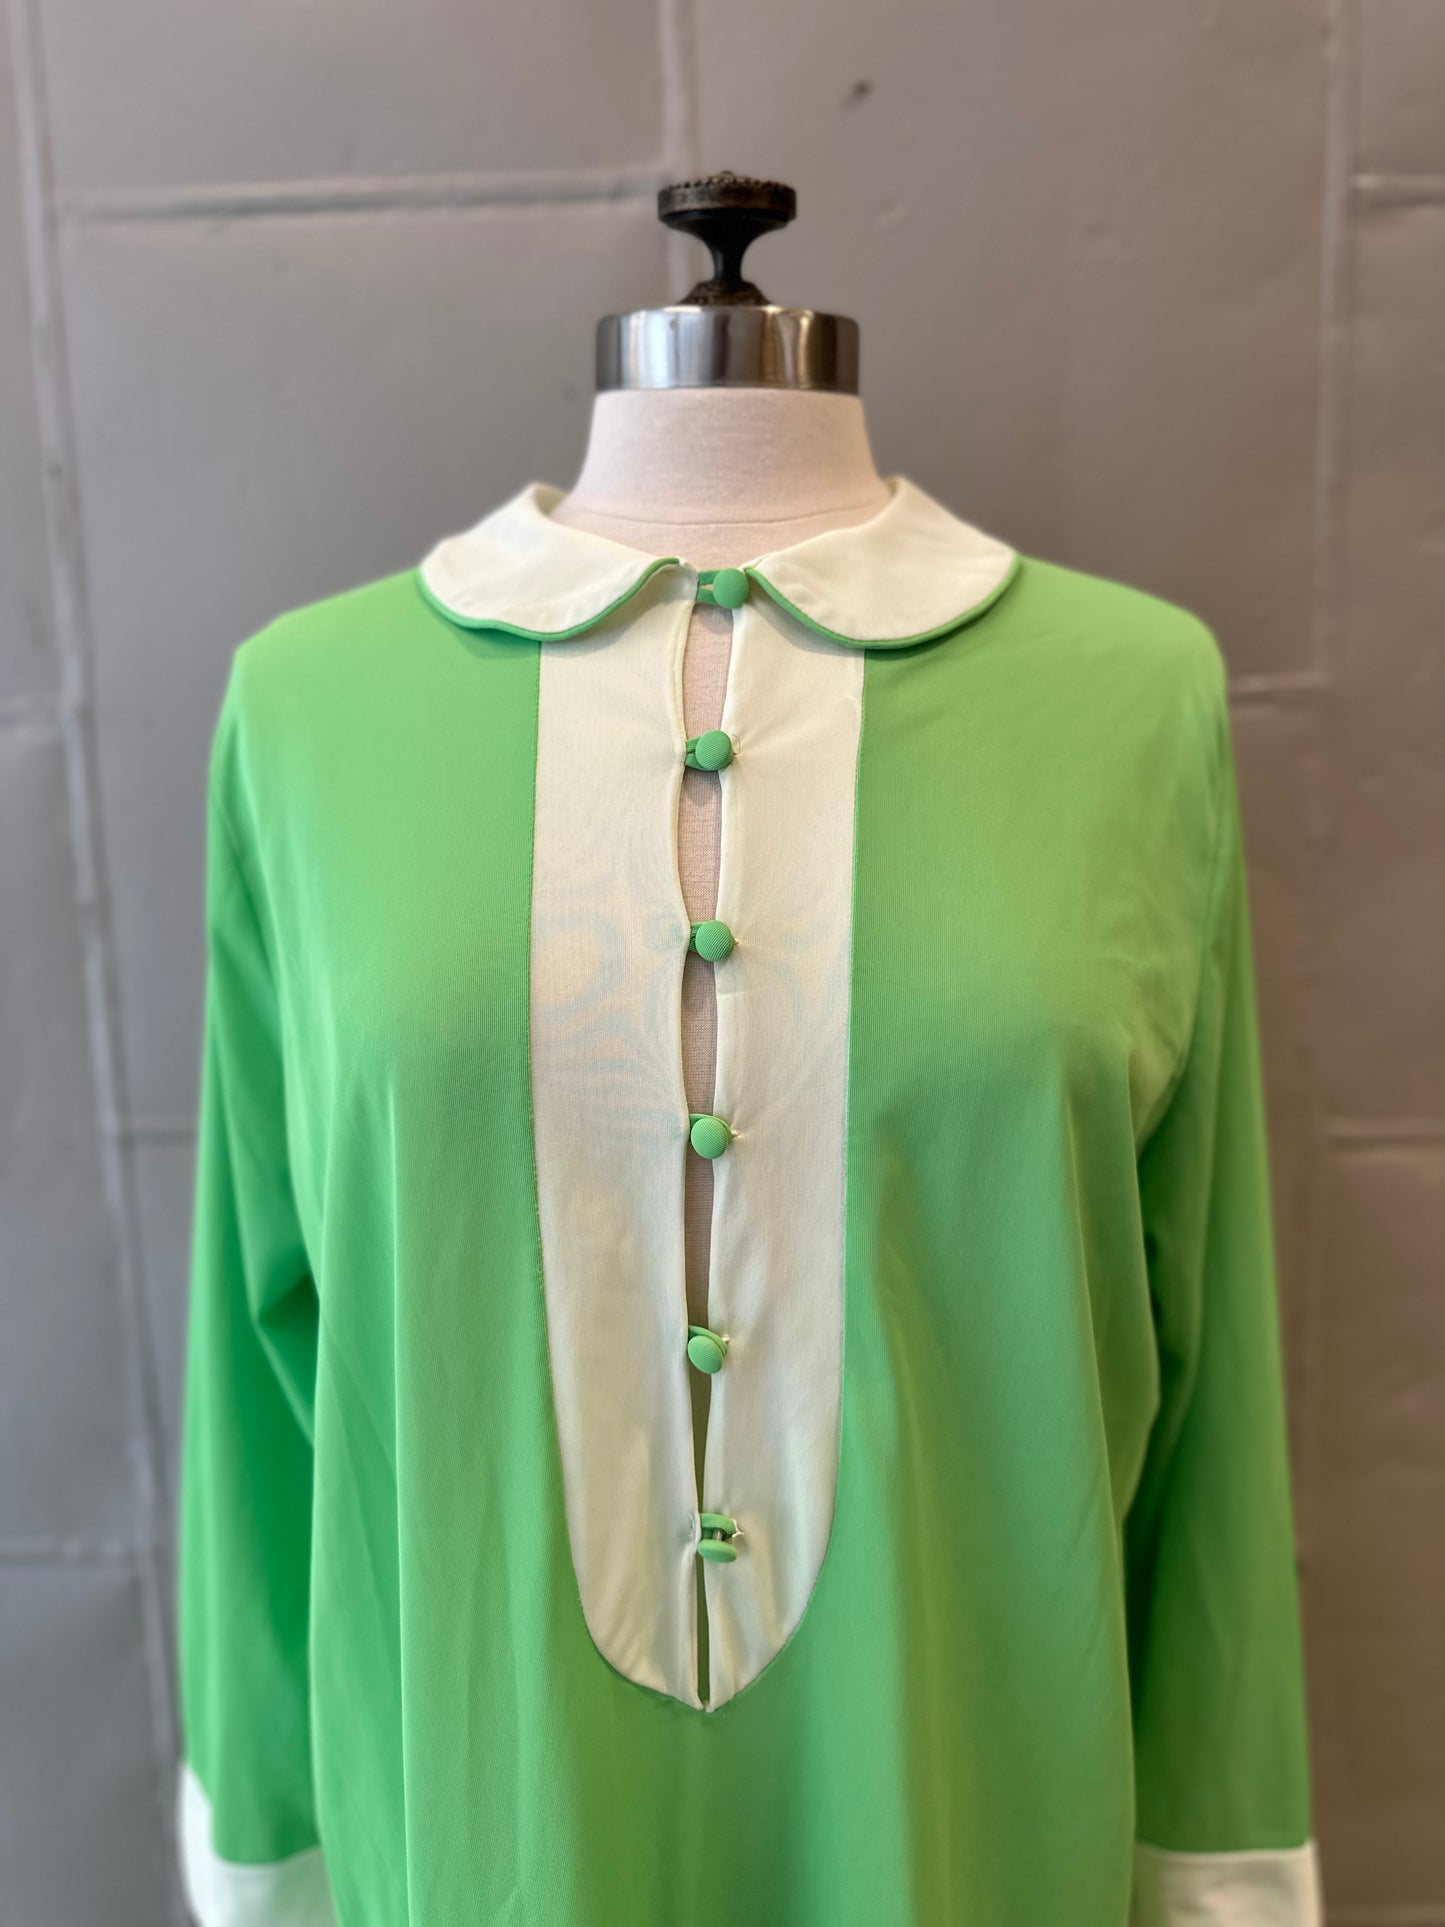 Vintage Danielle House Dress in Lime Green